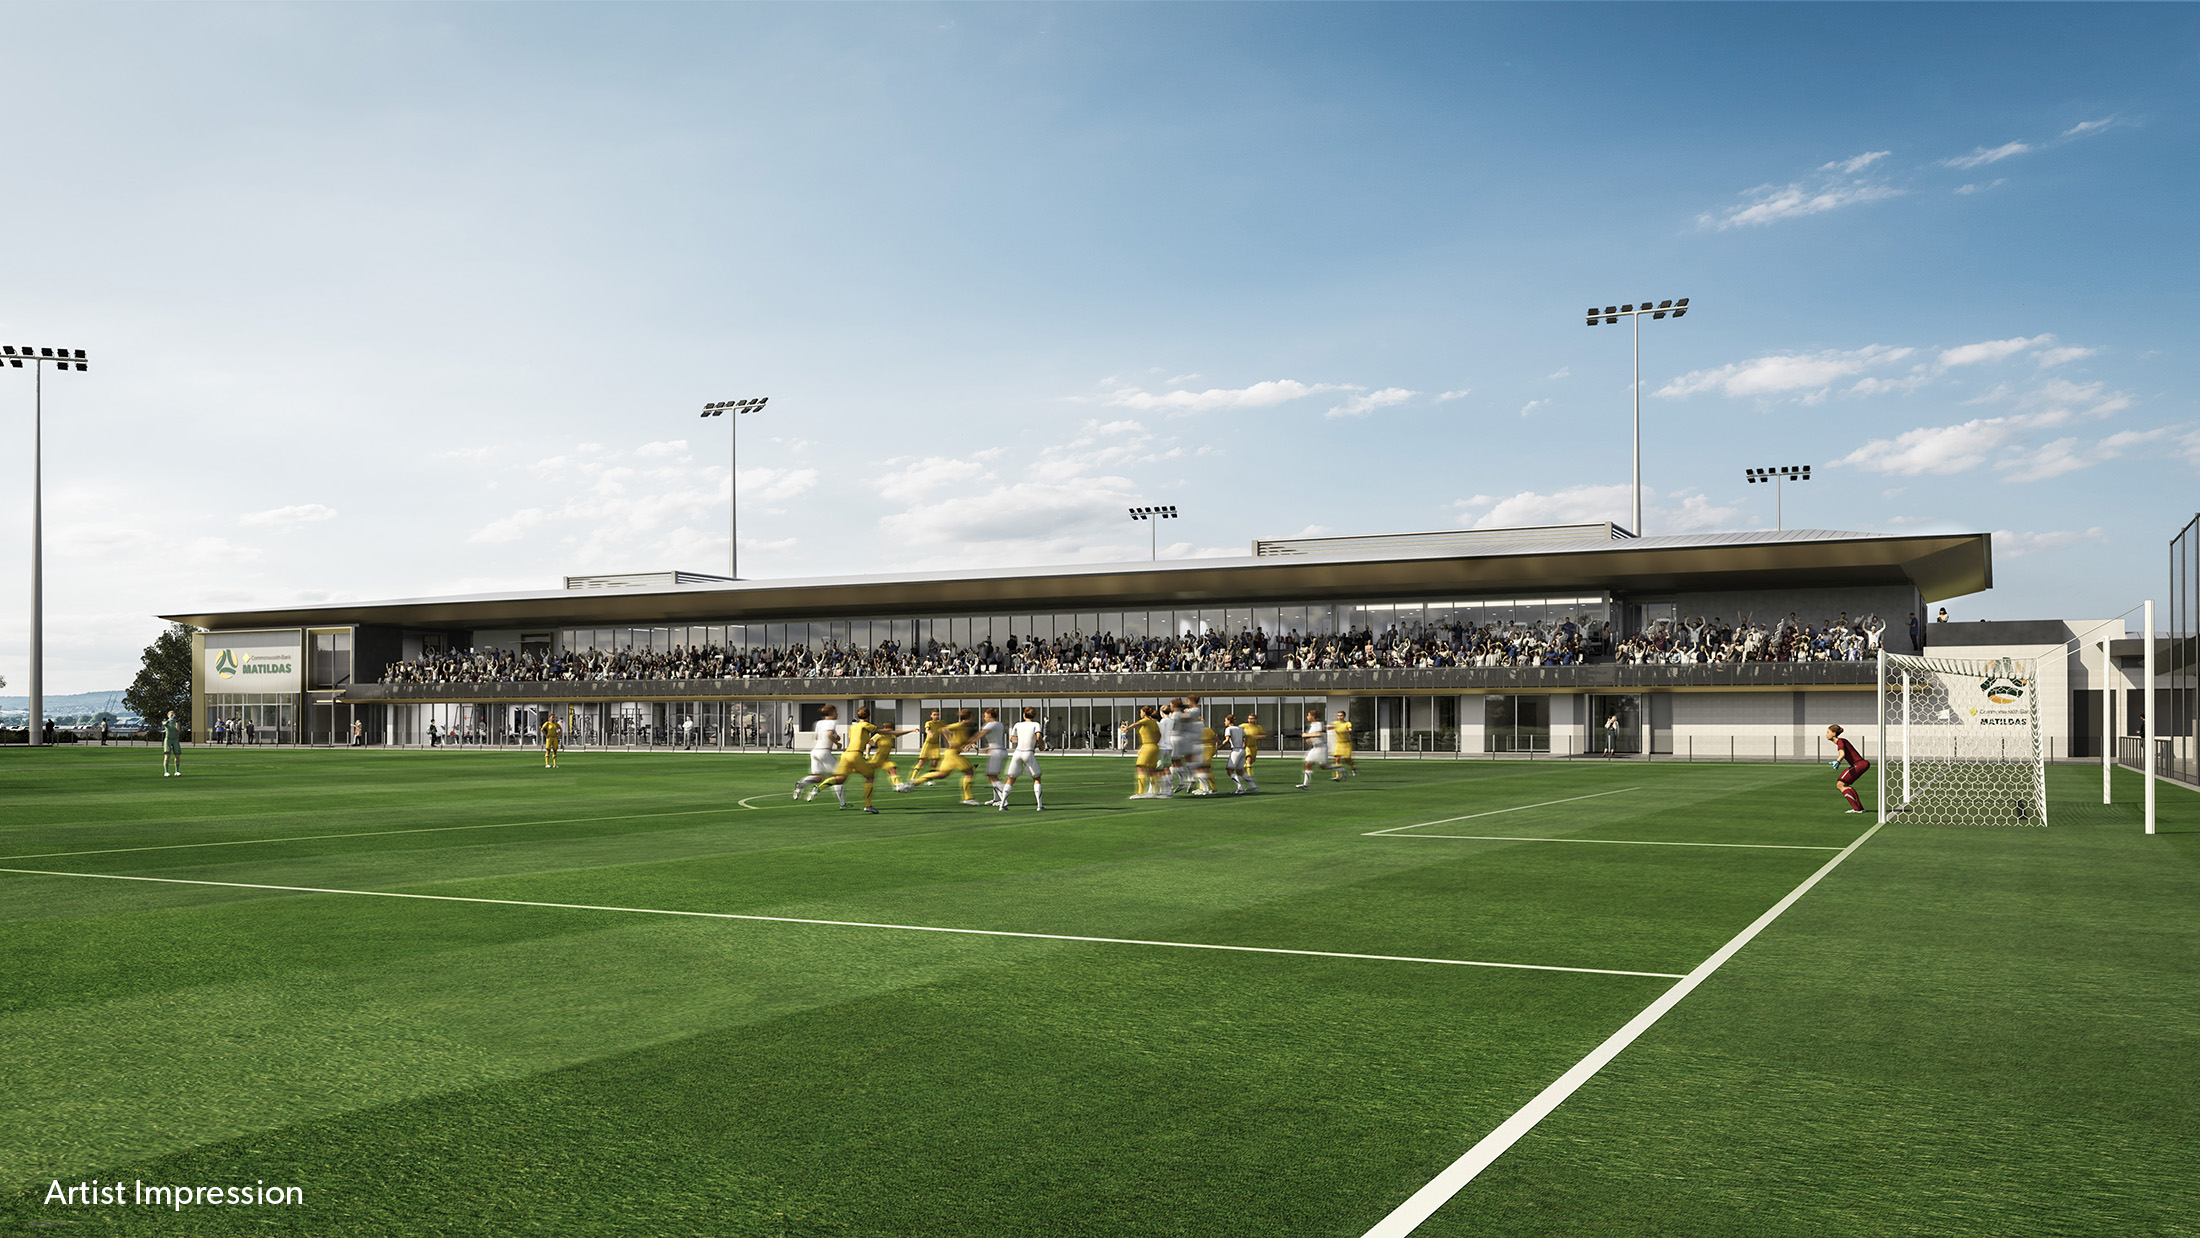 Artist impression: Show pitch with grandstand seating for 800 spectators (Photo: Football Victoria)